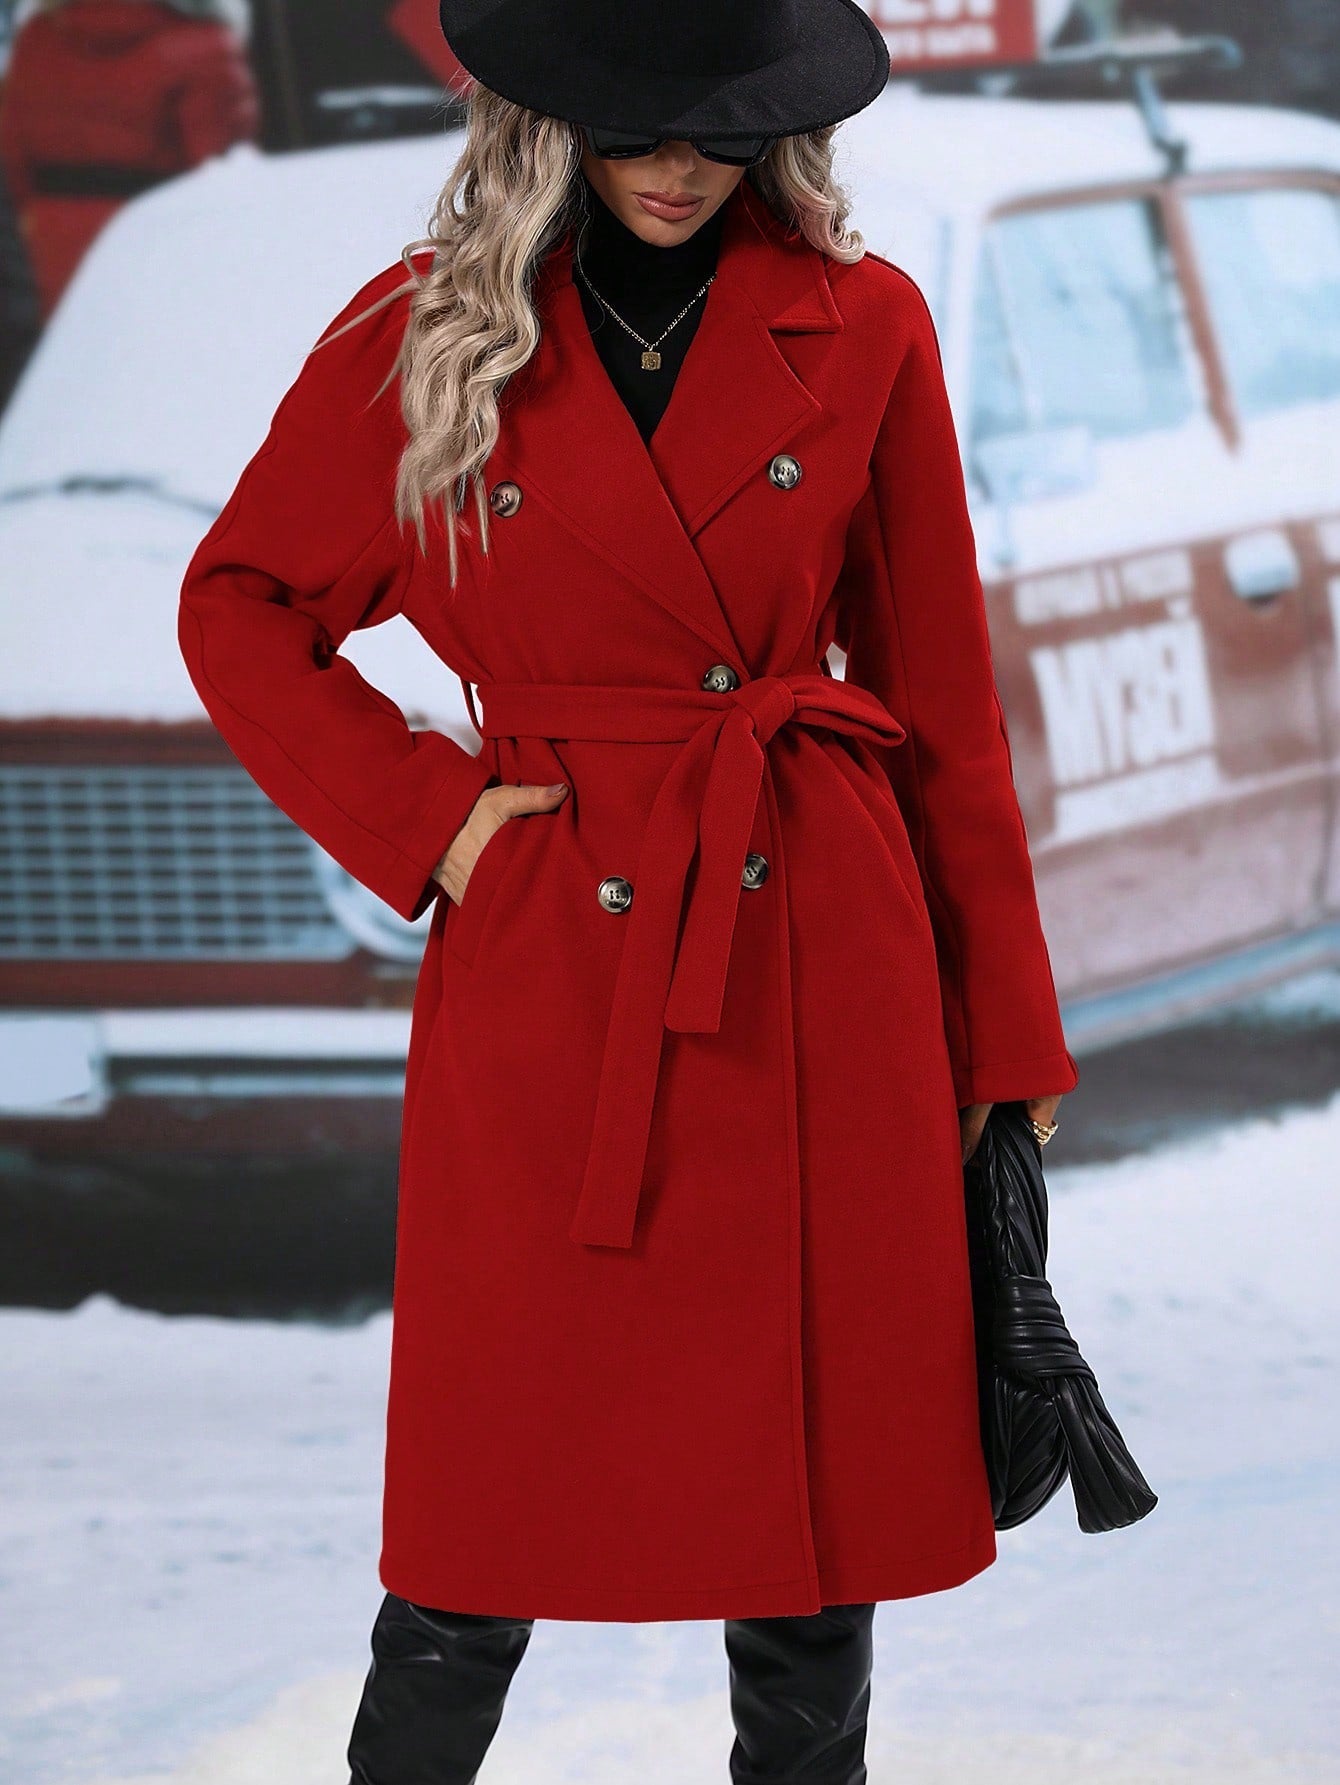 Lapel Neck Double Breasted Belted Overcoat - Negative Apparel